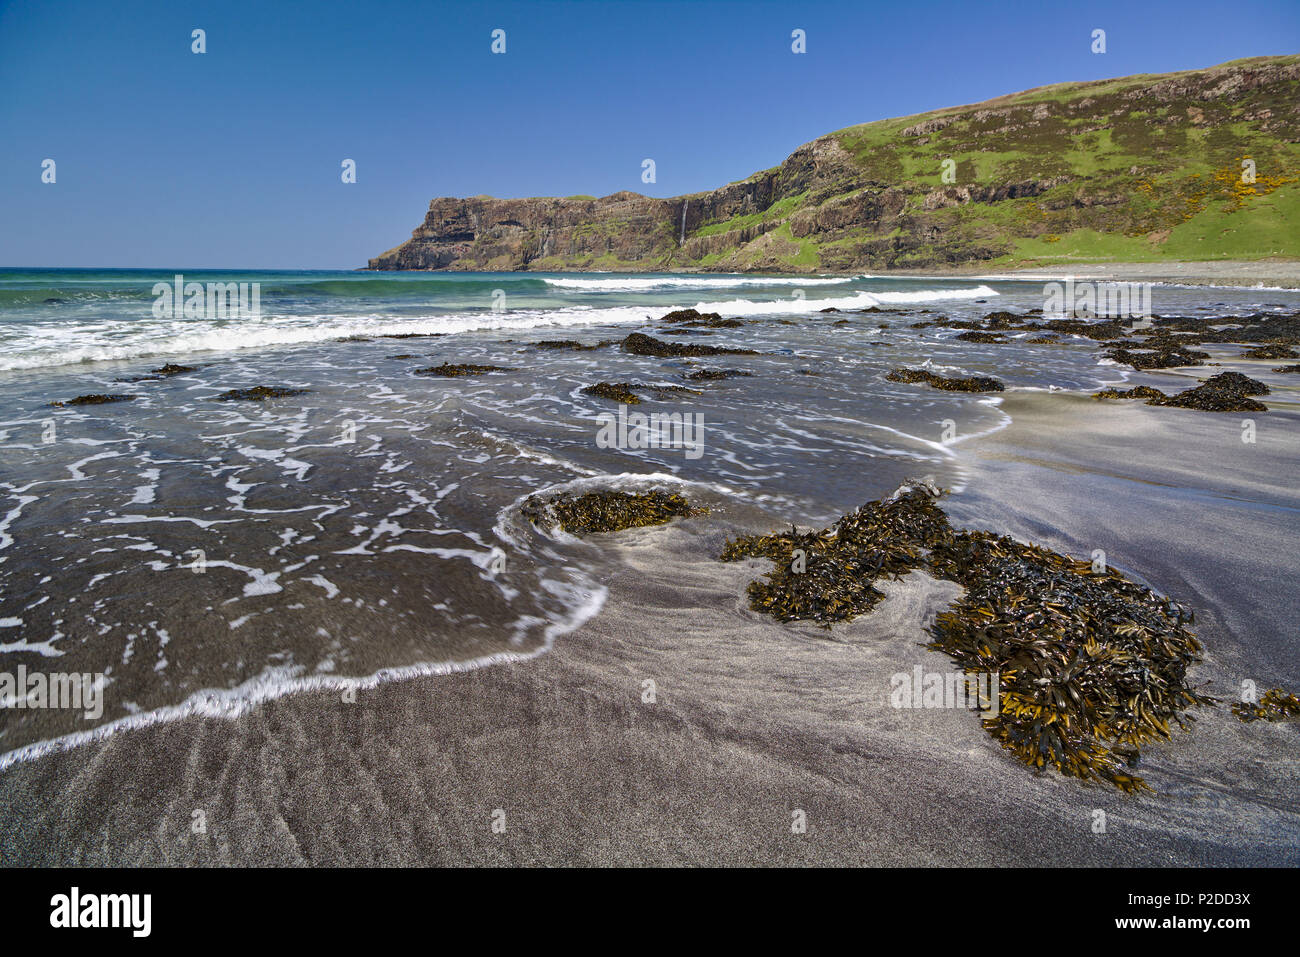 Talisker Bay, Isle of Skye, Scotland - Sandy beach with seaweed in the foreground and white surf and sea cliffs in the distance Stock Photo